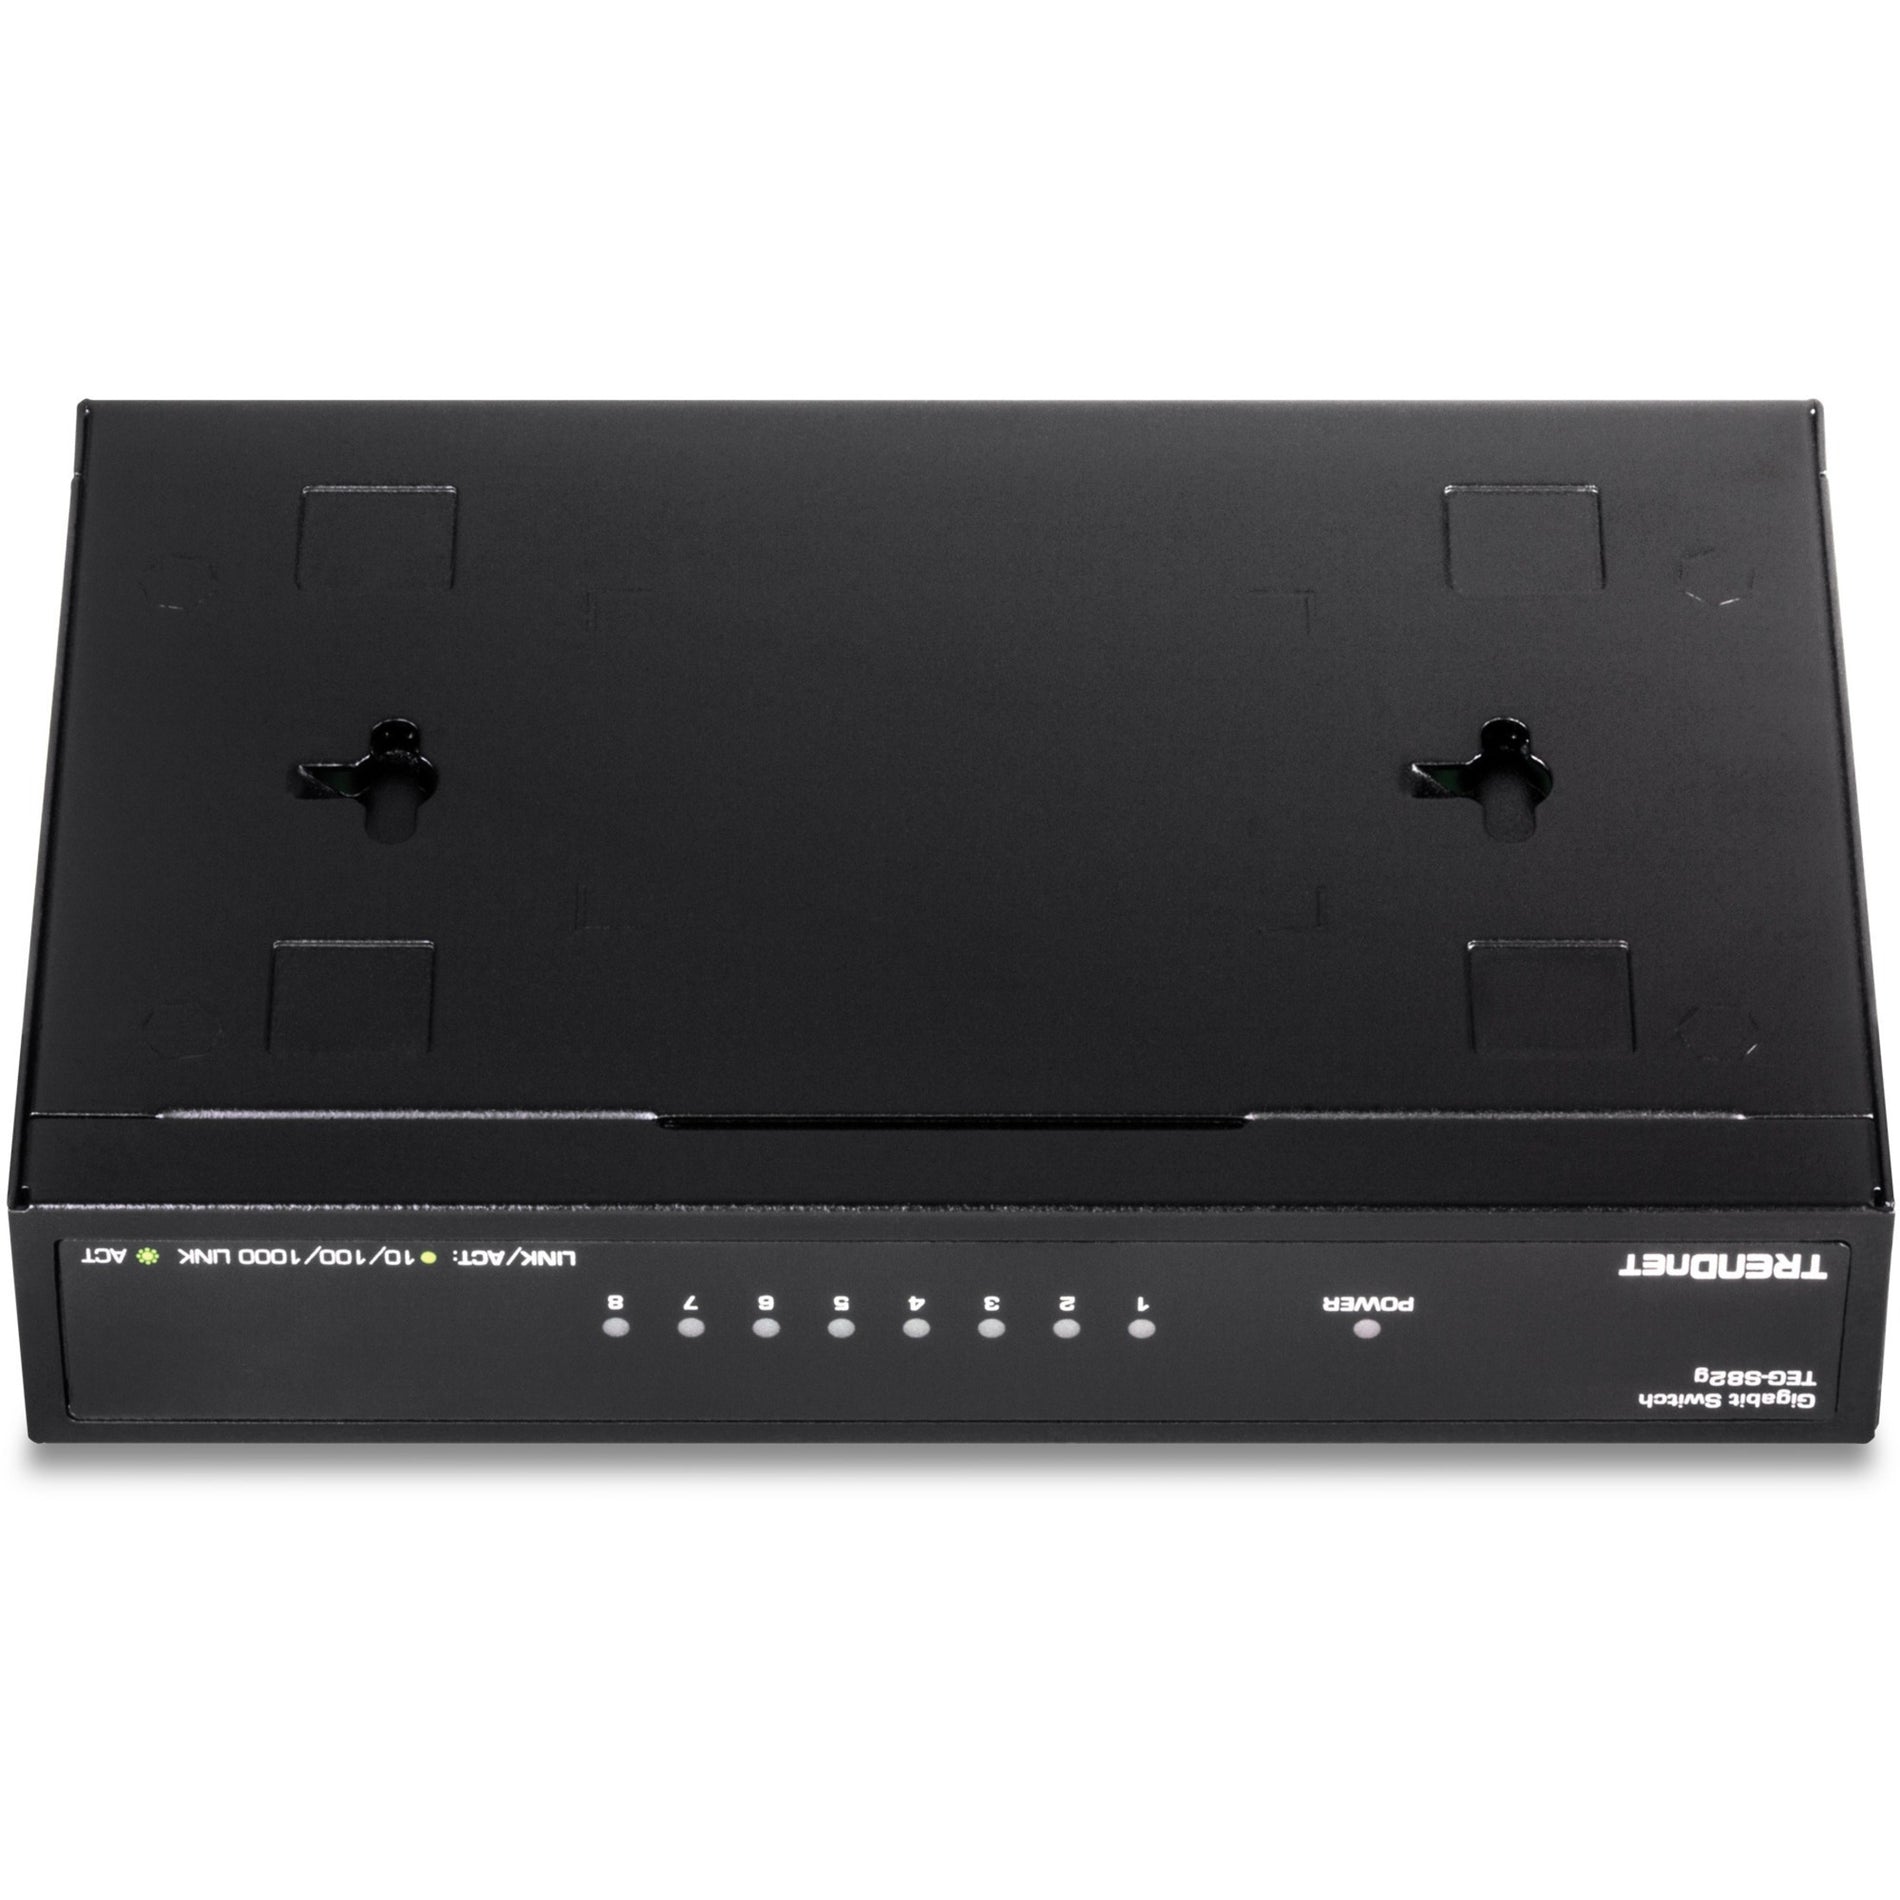 TRENDnet TEG-S82g 8-port Gigabit GREENnet Switch with Metal Case, Lifetime Warranty, TAA and NDAA Compliant, CE and FCC Certified, Gigabit Ethernet Network Ports